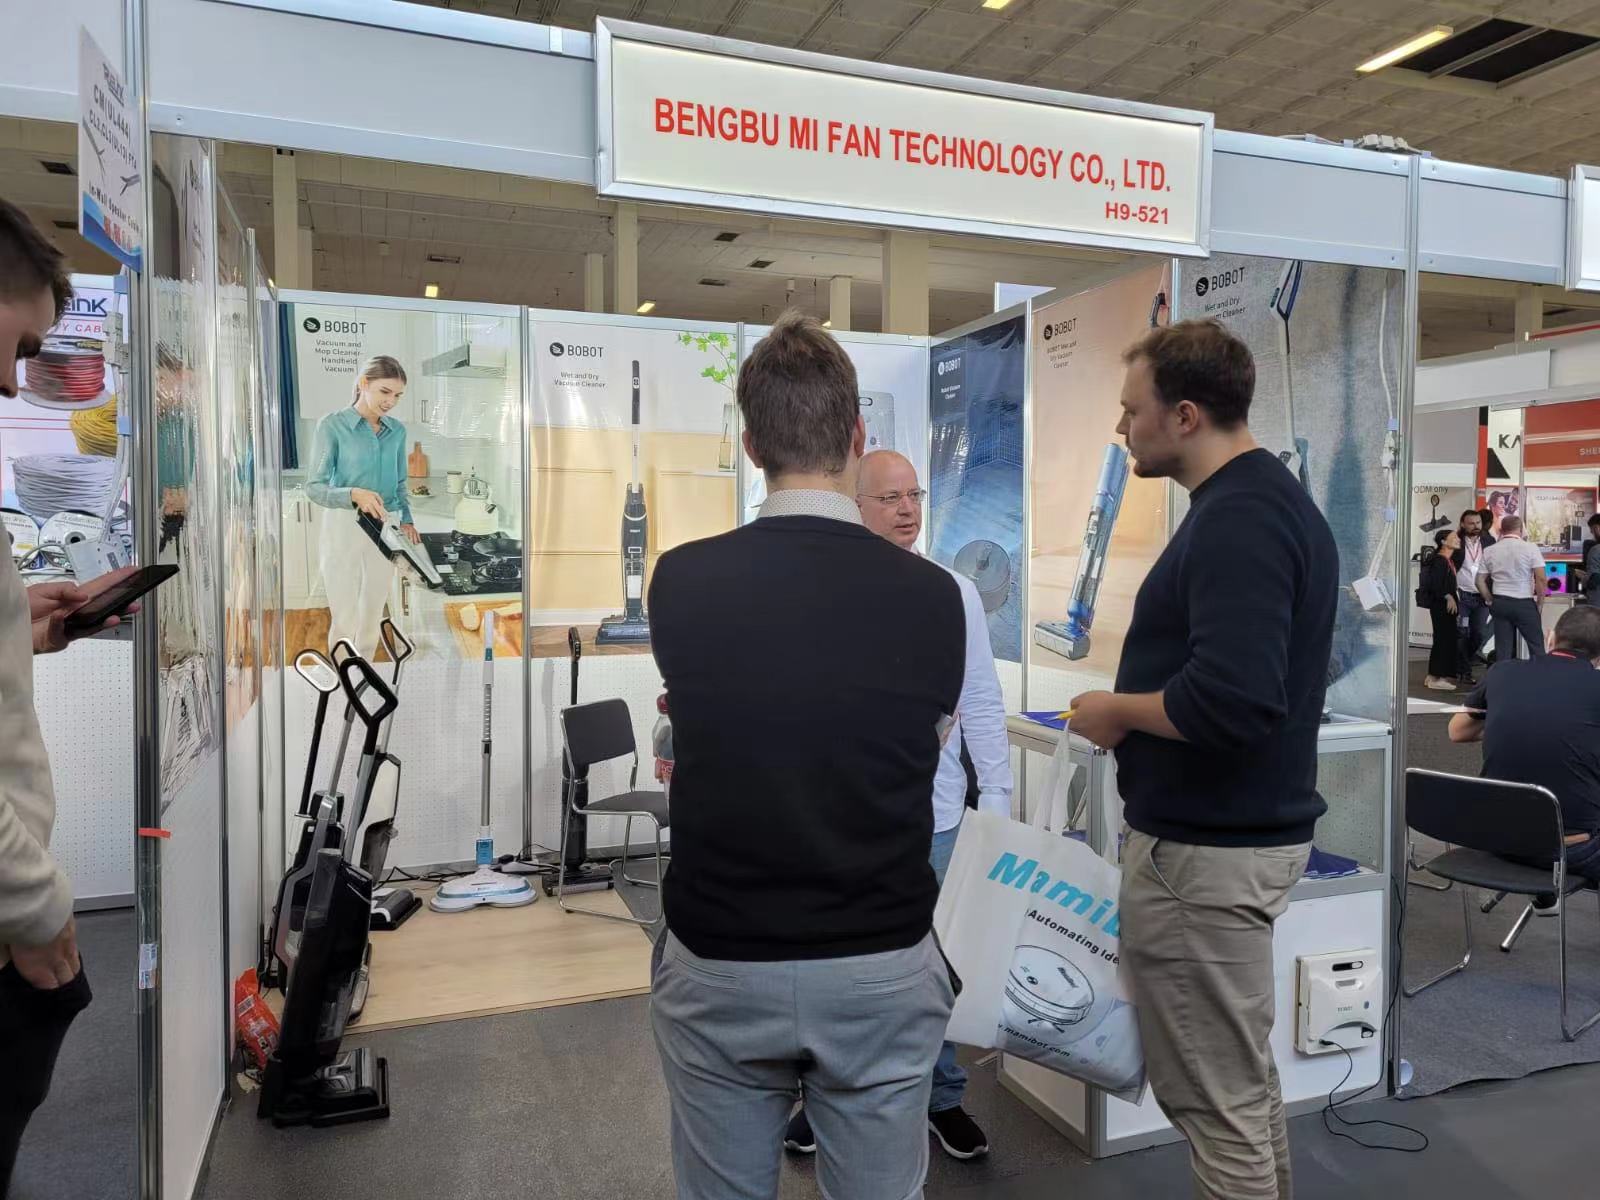 Bengbu MiFan Technology Co., Ltd Showcases Latest Wet and Dry Vacuum Cleaner Innovation at IFA - Consumer Electronics Unlimited Exhibition in Berlin, Germany. - Company News - 3